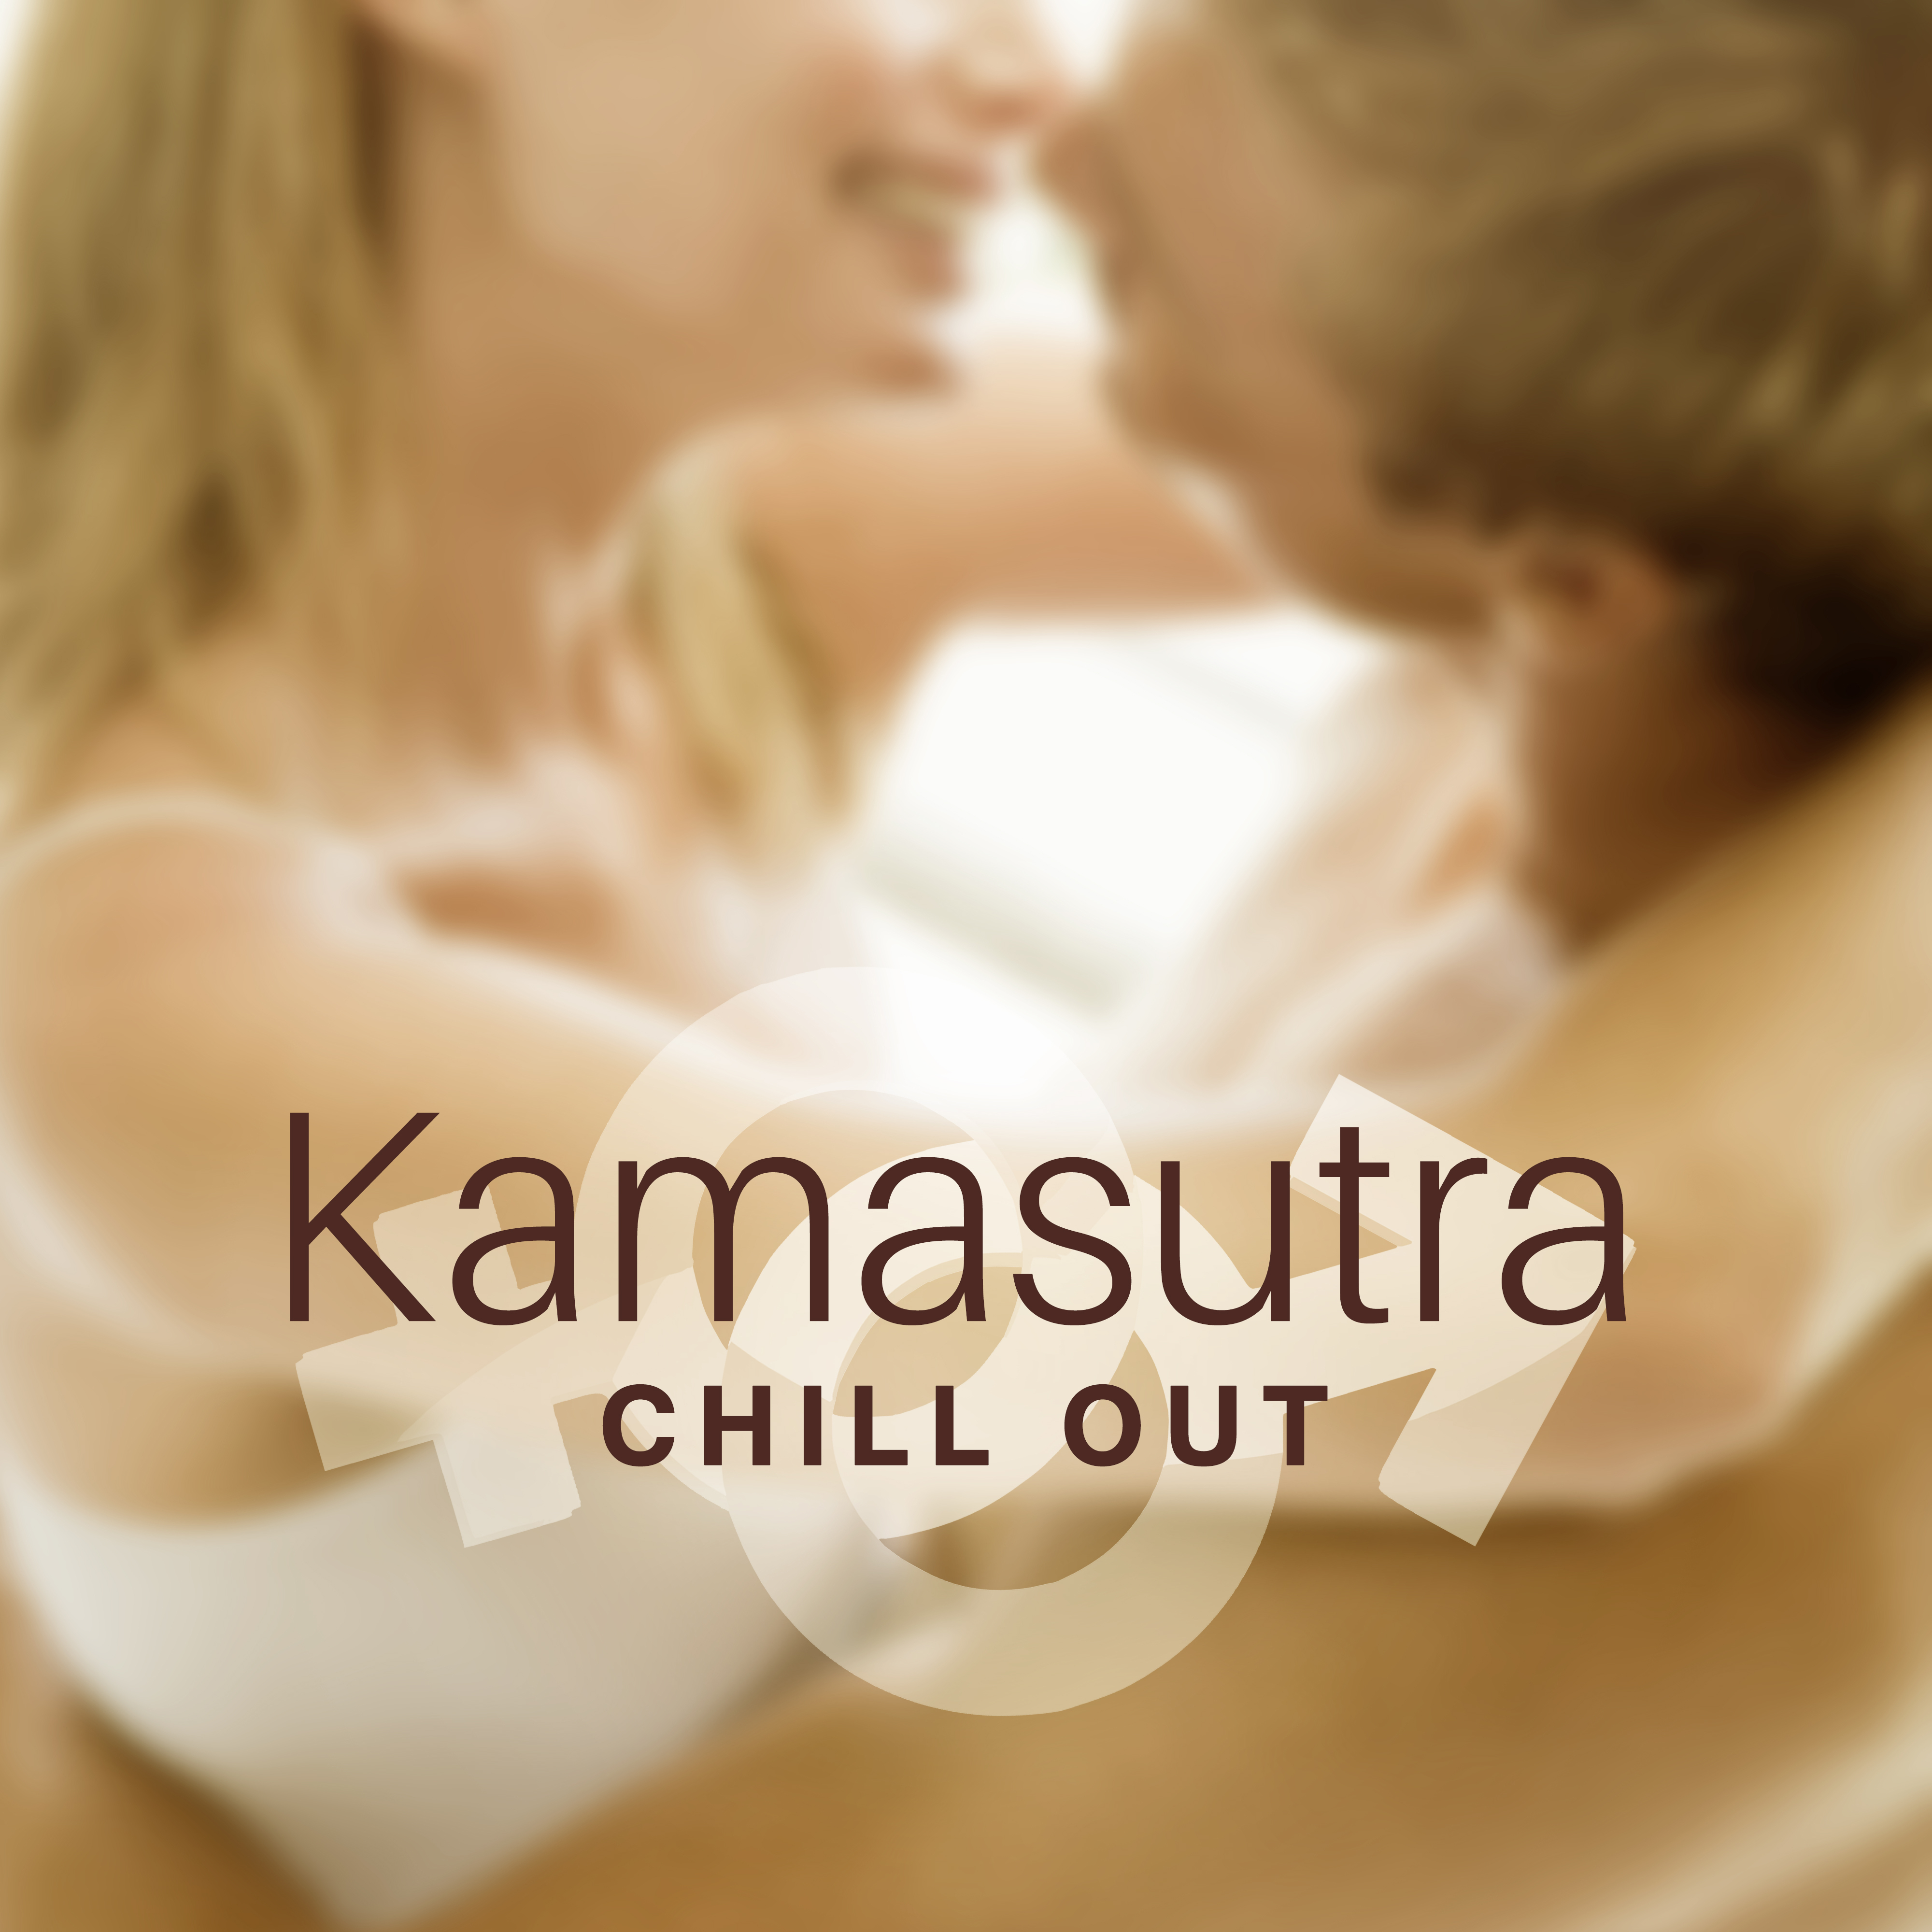 Kamasutra Chill Out  Erotic Game for Two,  Chill, Erotic Music, Making Love, Tantric , Relax for Lovers